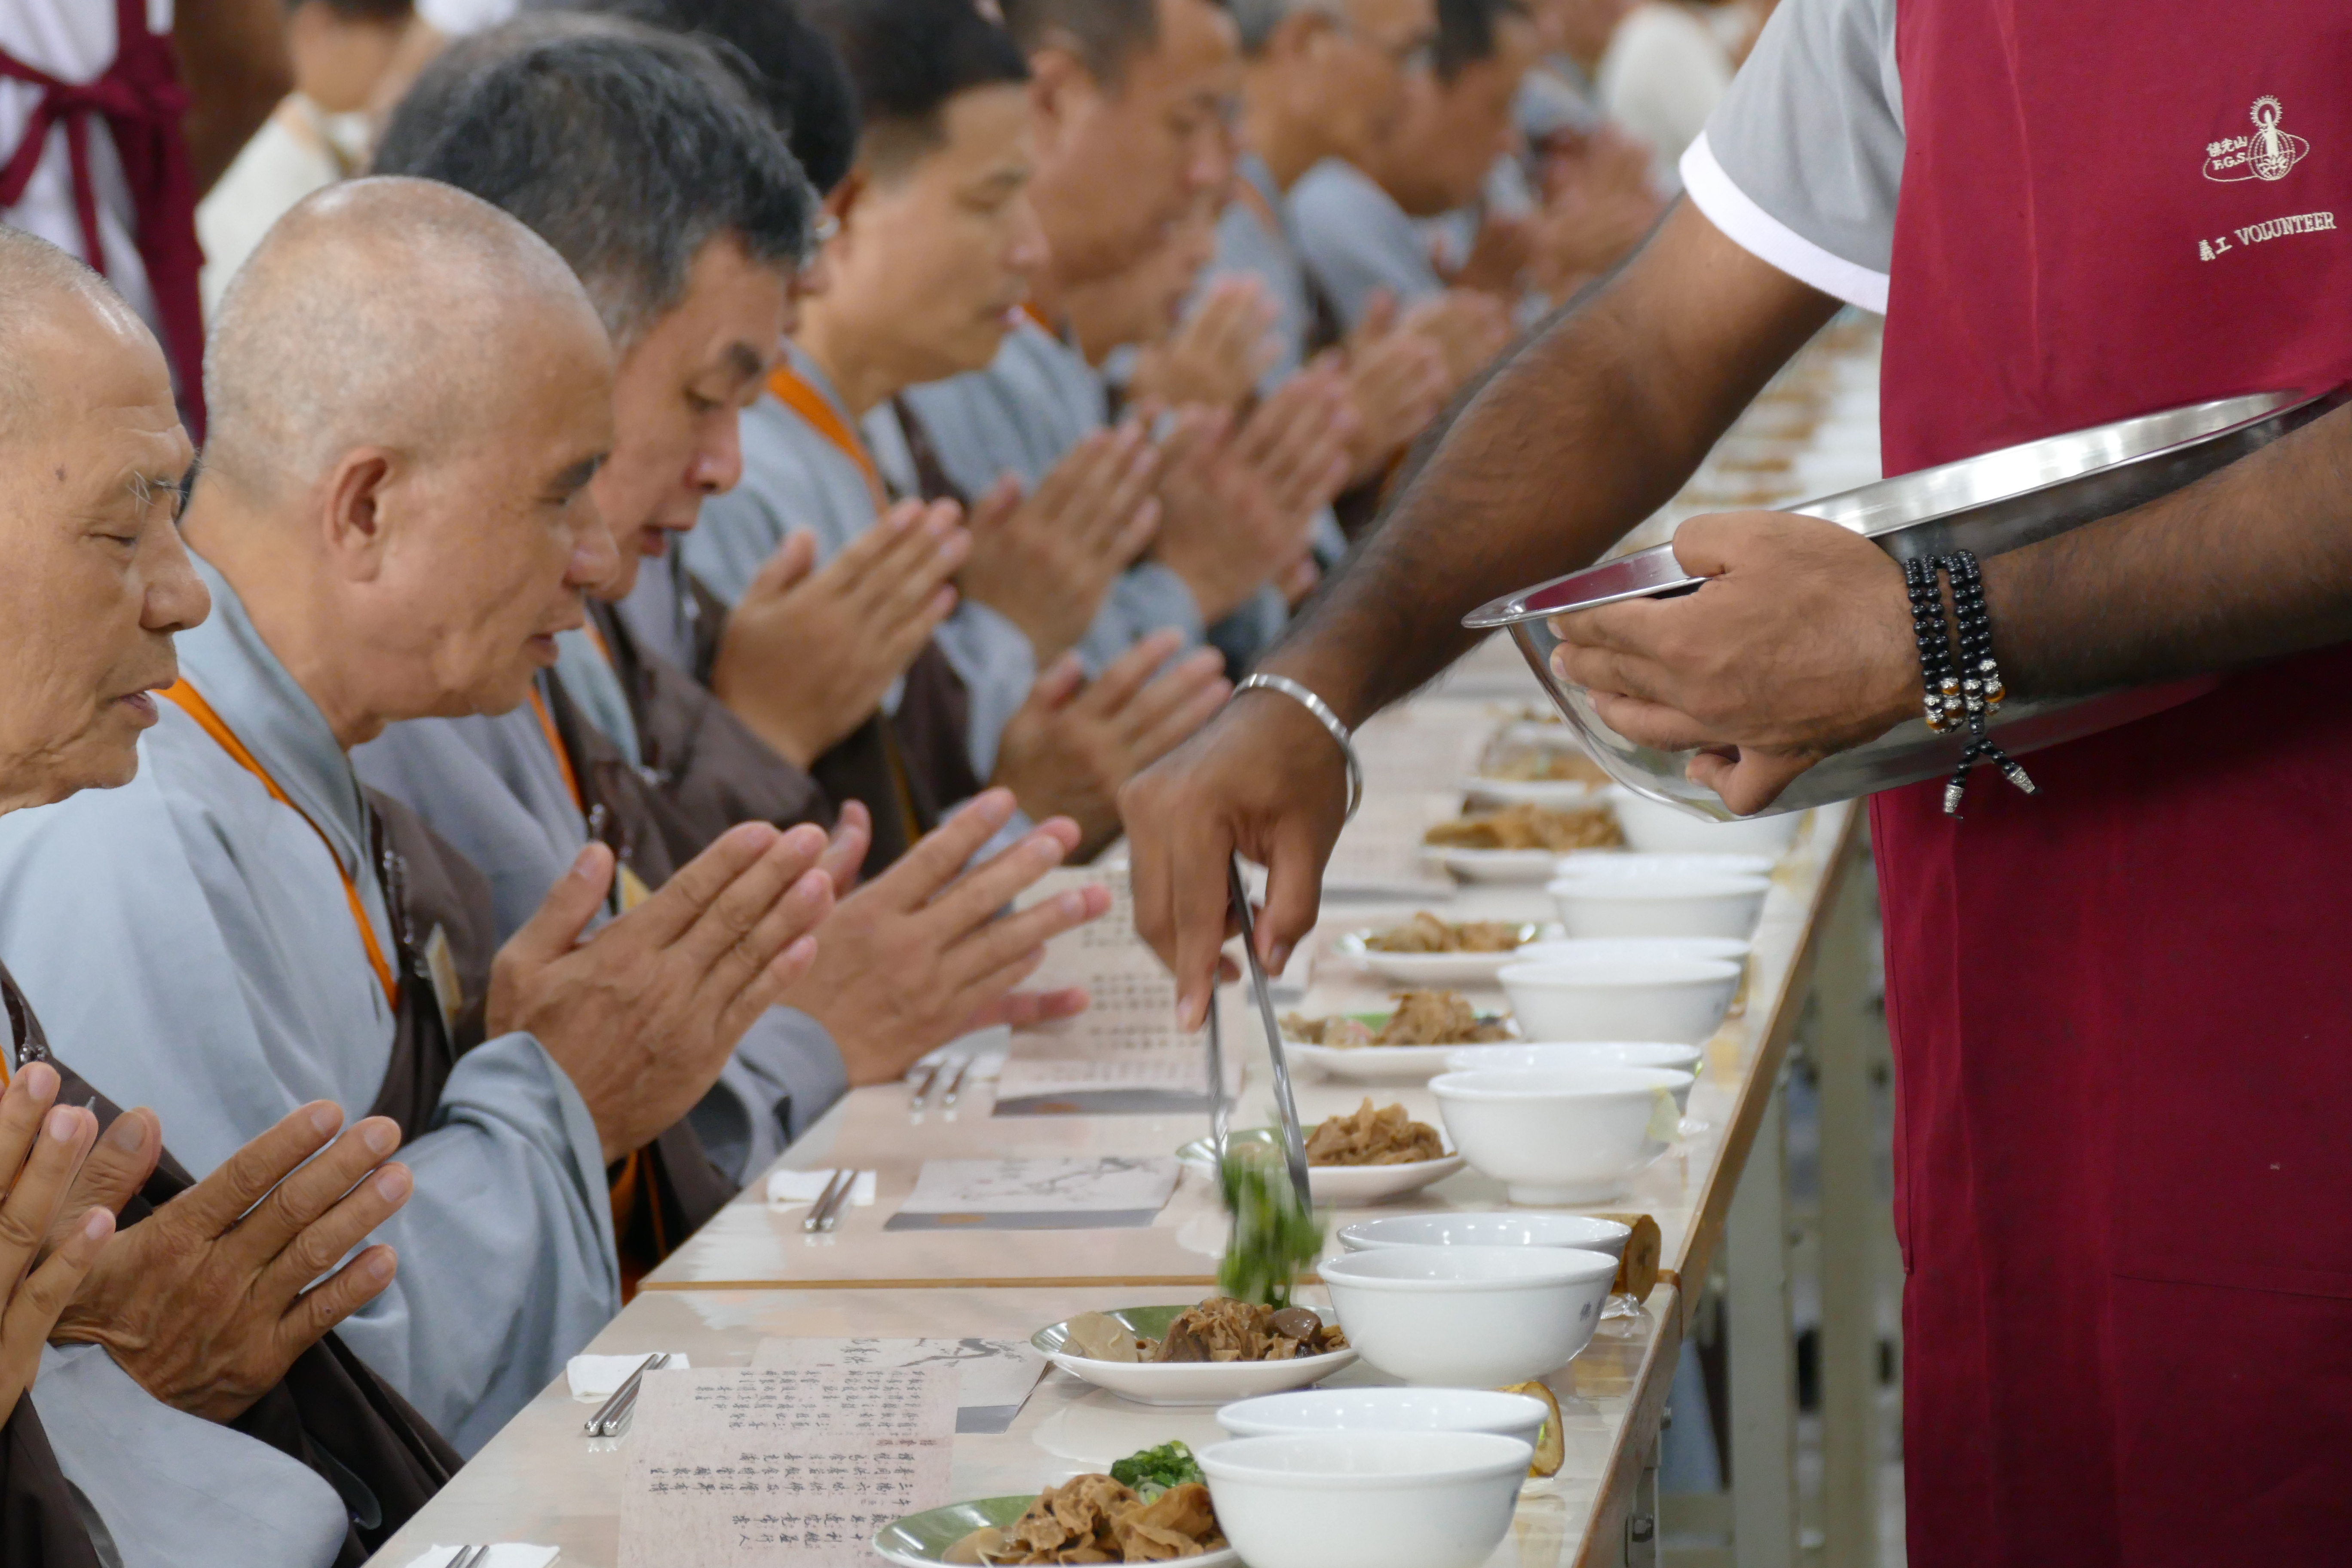 Preceptees eat together during the retreat at Fo Guang Shan Headquarters, 2016. Photo by Life News Agency.